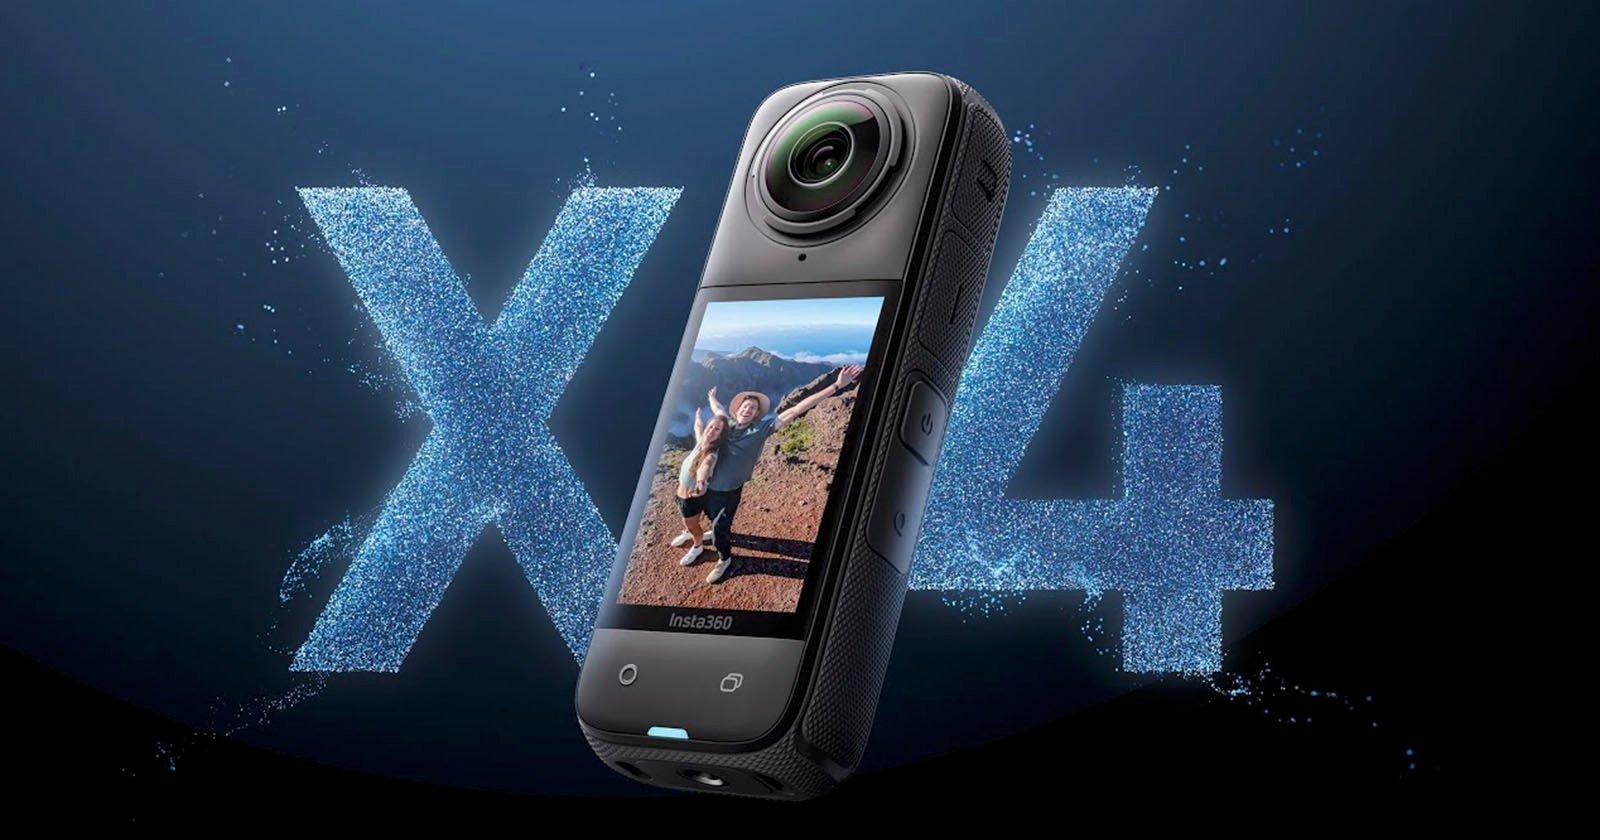 The new X4 camera has 8K video